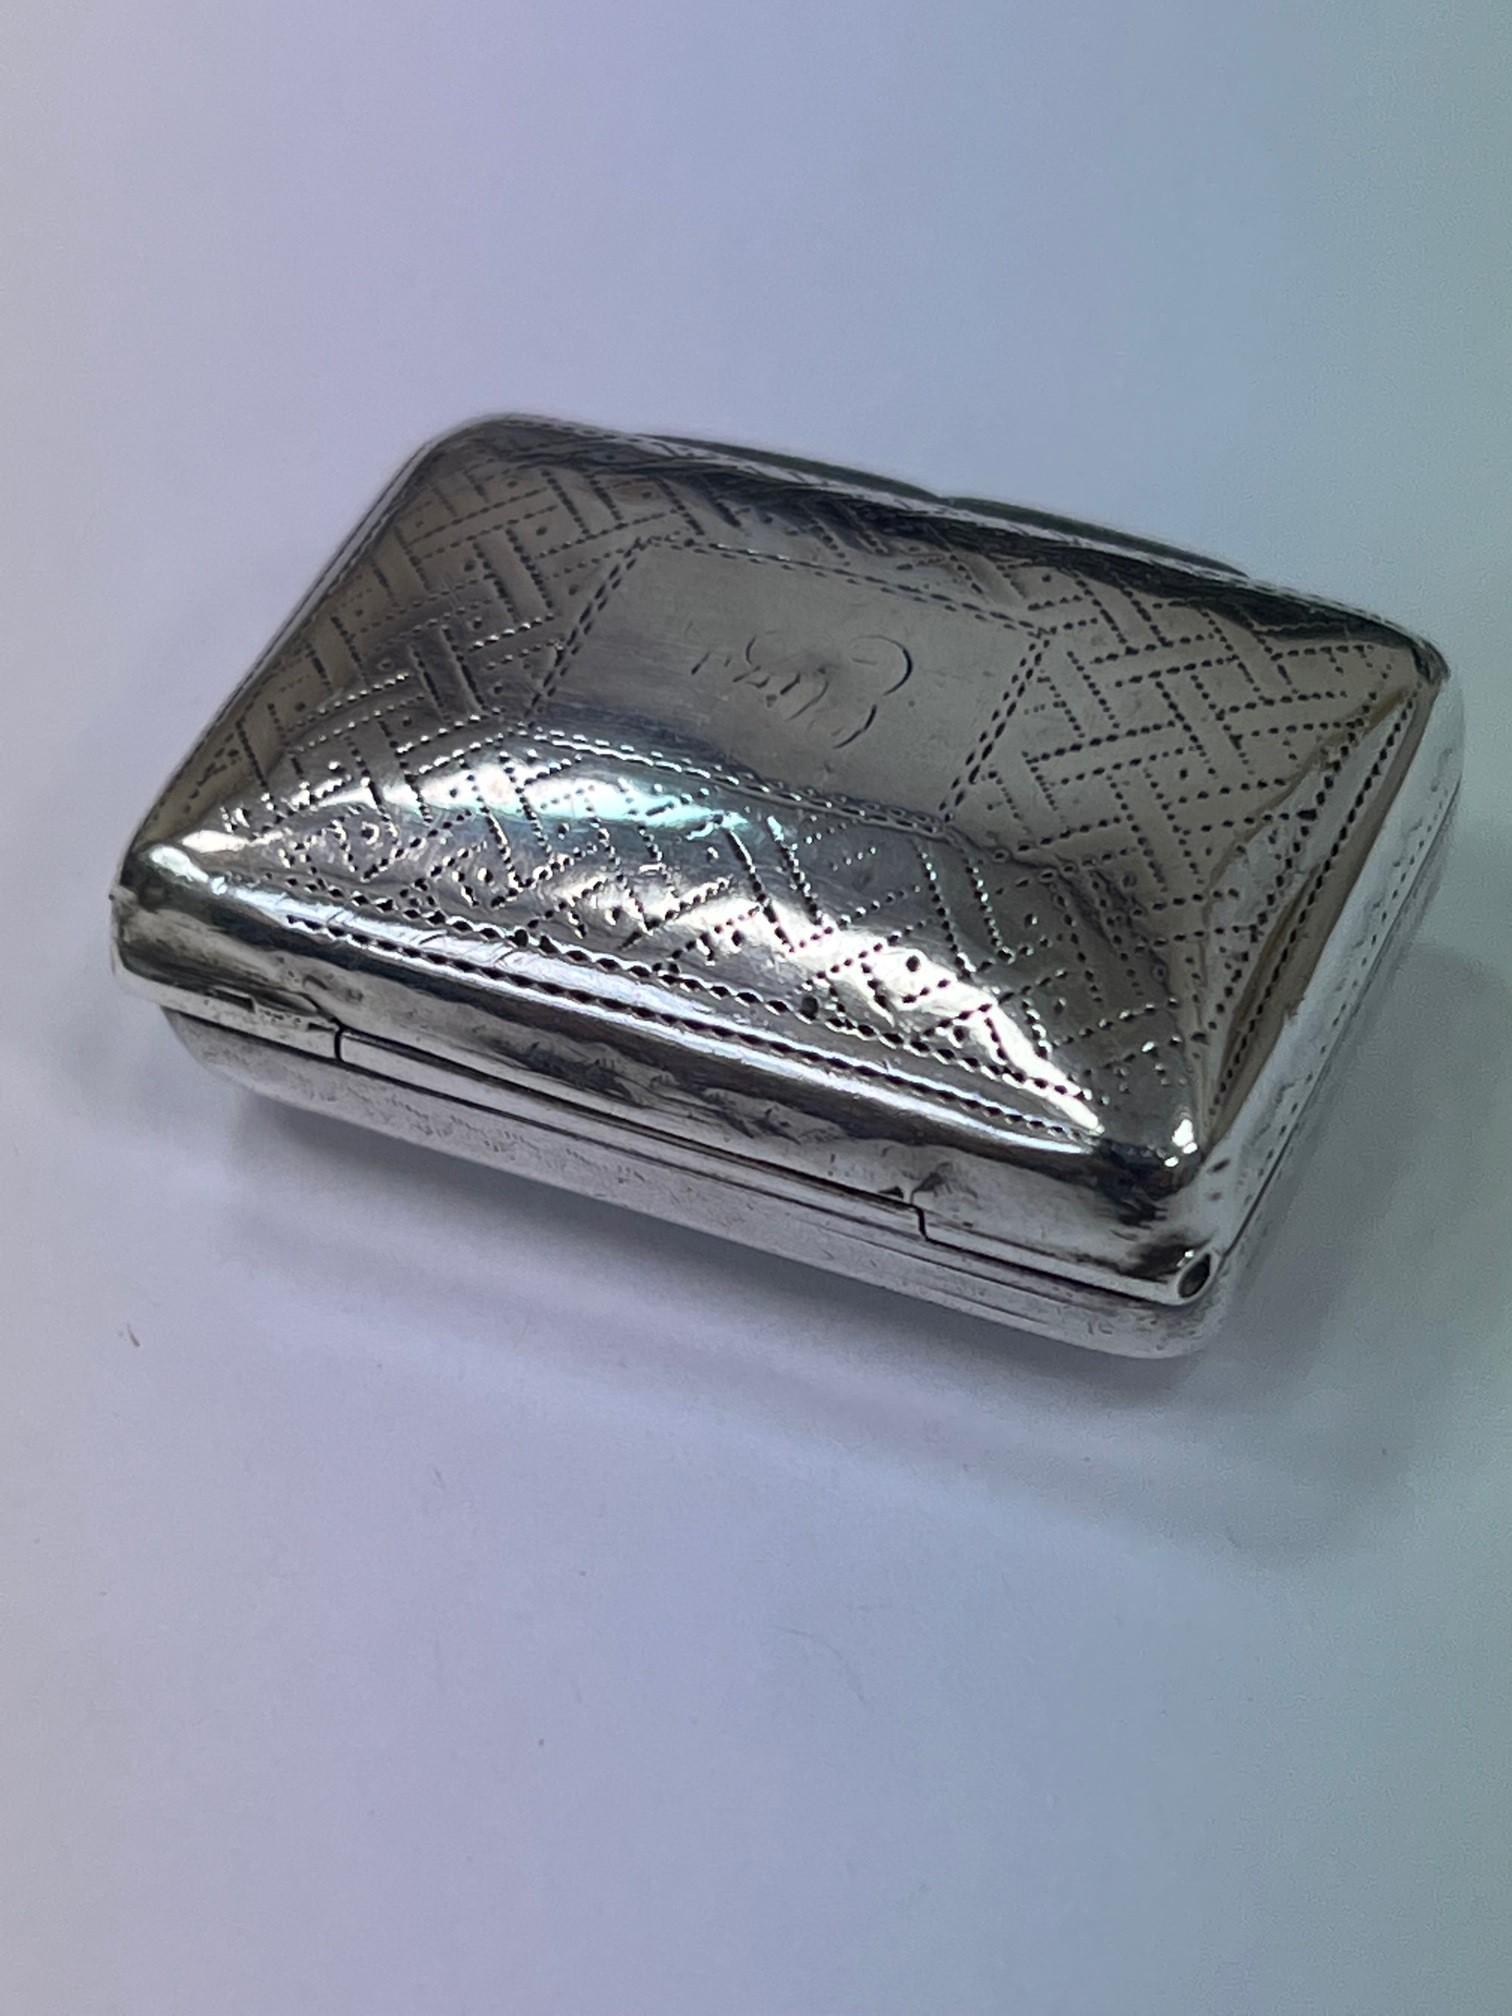 Early 19th century sterling silver puffed pillow like vinaigrette by Thomas Shaw Birmingham England Silvermaker. Thomas Shaw renowned maker of vinaigrettes and snuff boxes worked in Birmingham England between 1818 and 1845. Vinaigrette jewelry was